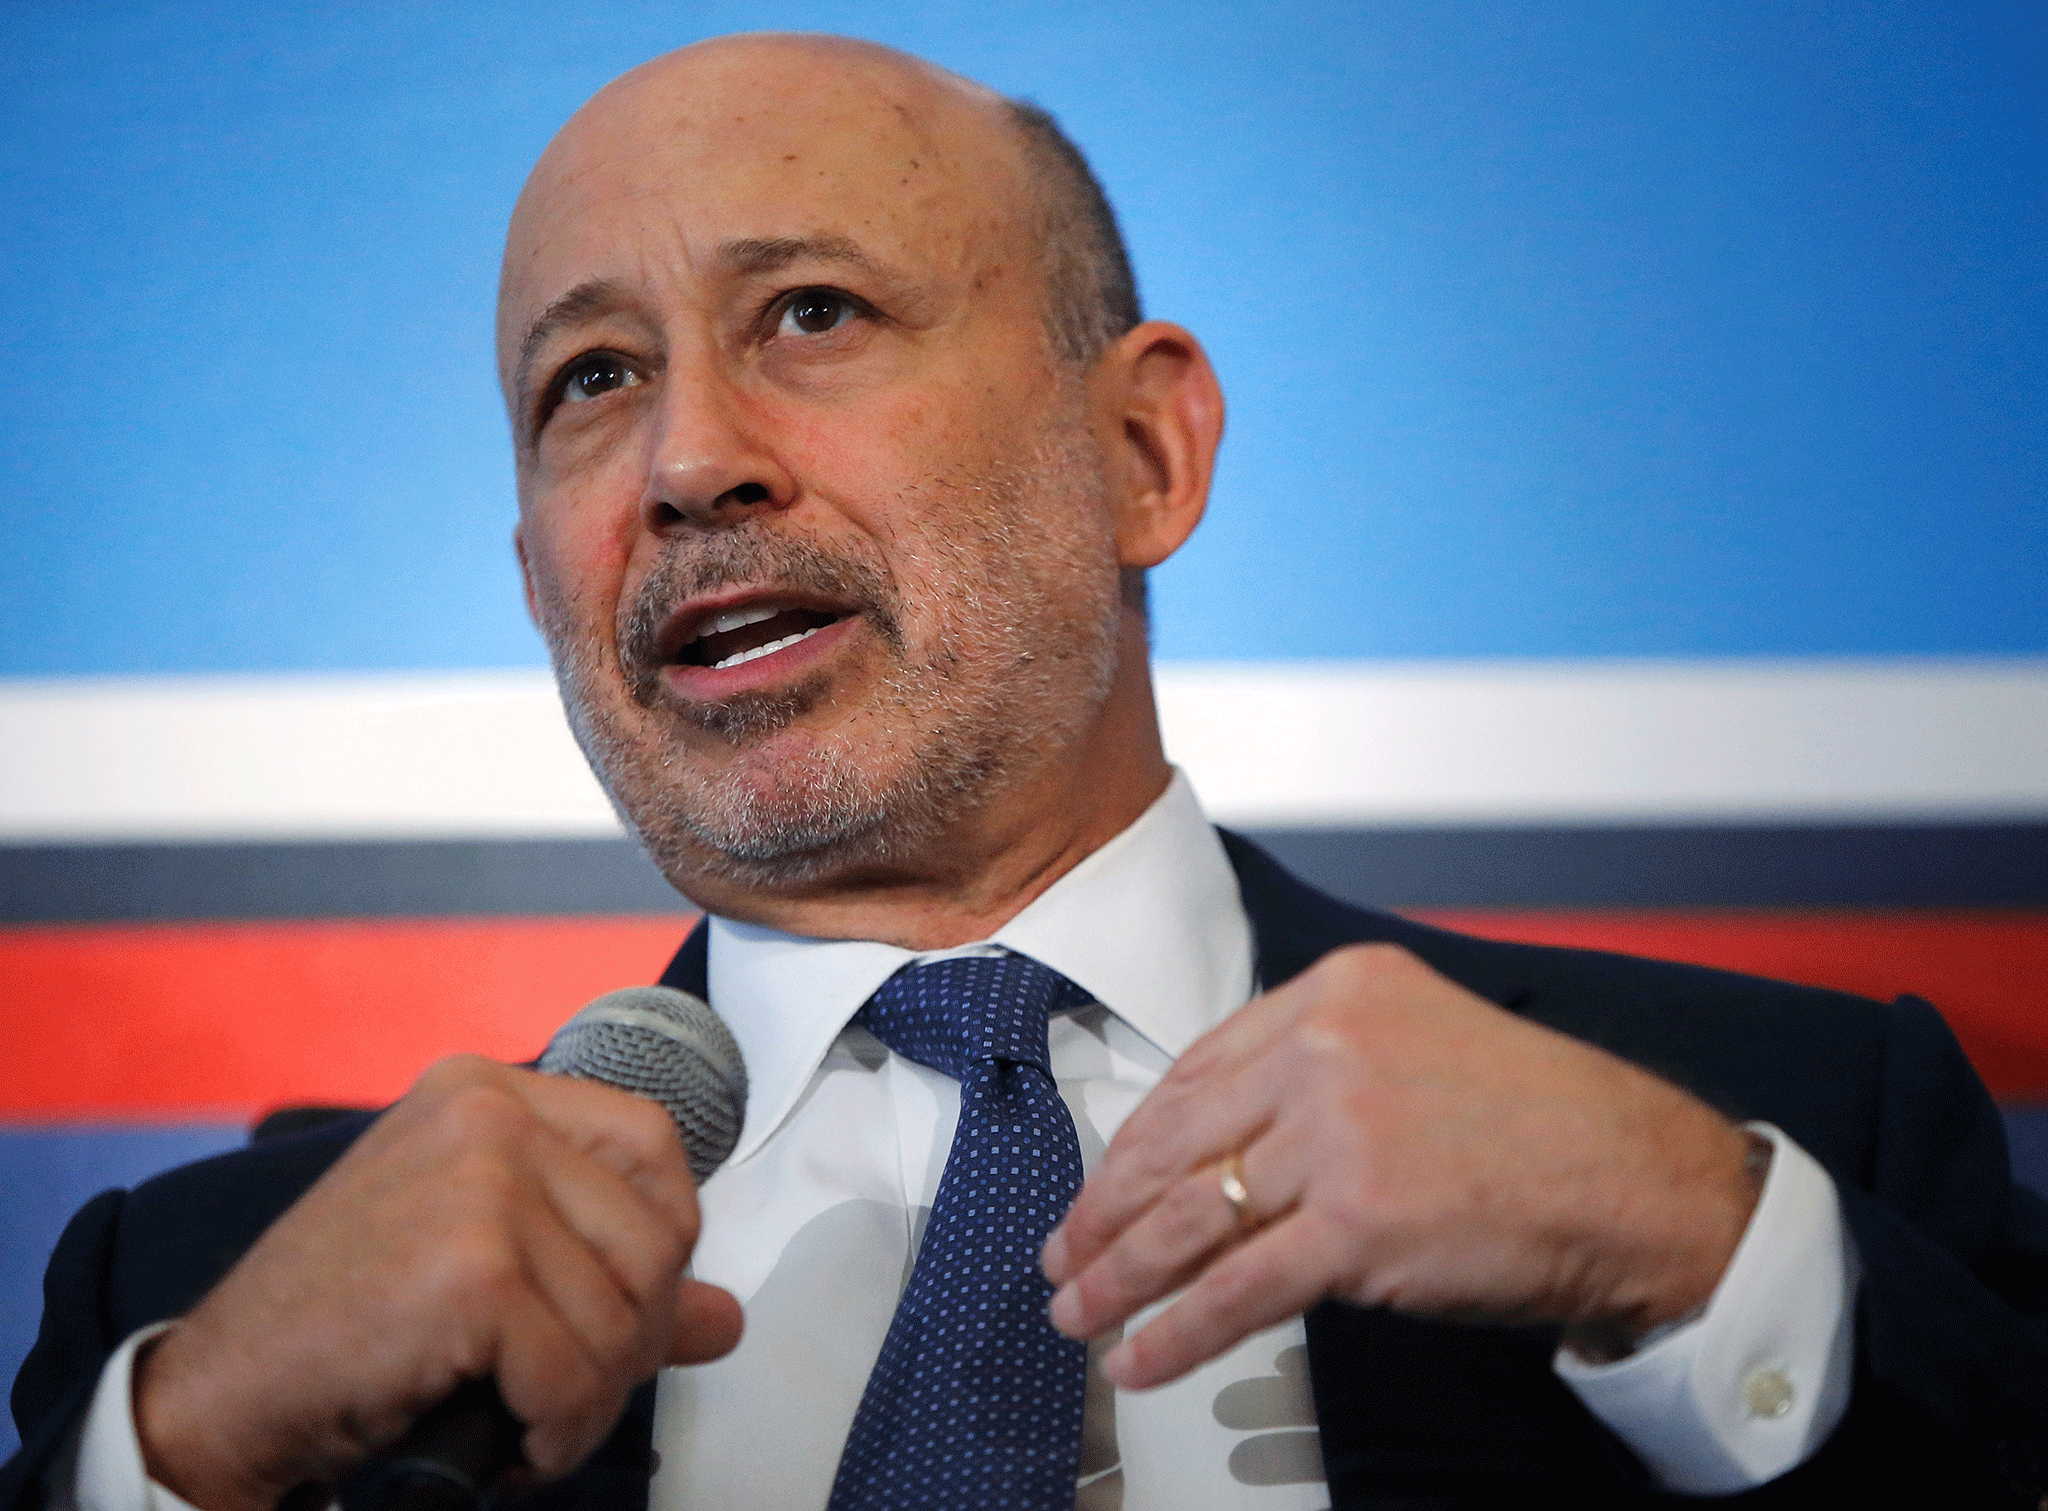 Goldman Sachs boss appears to call for second Brexit referendum